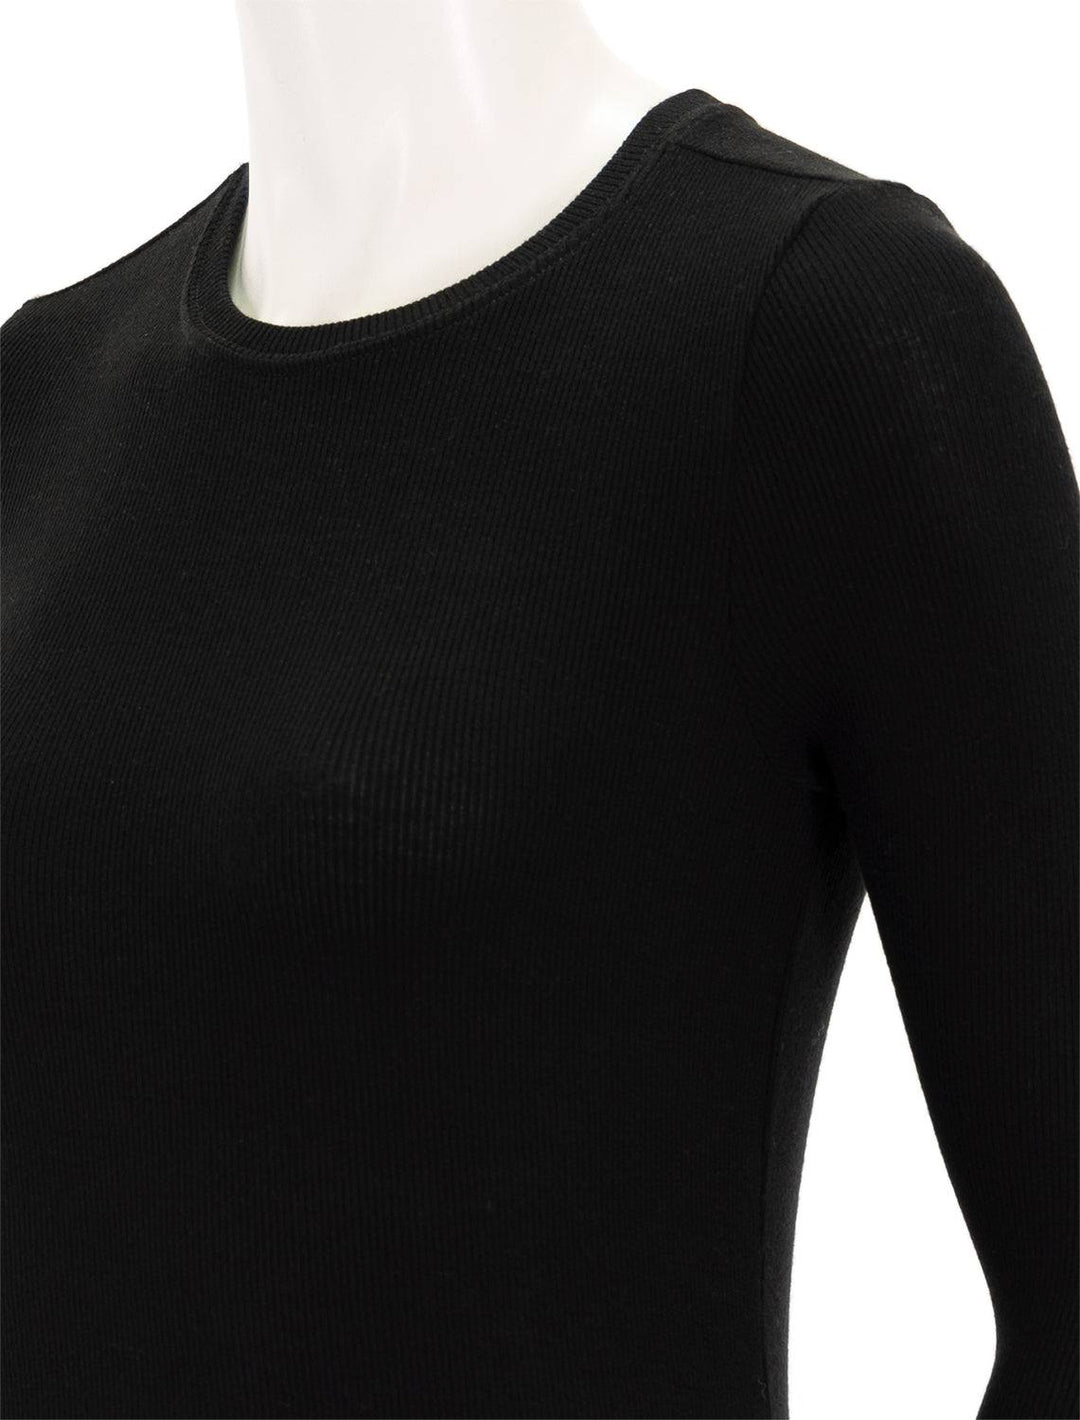 Close-up view of Goldie Lewinter's ribbed long sleeve tee in black.